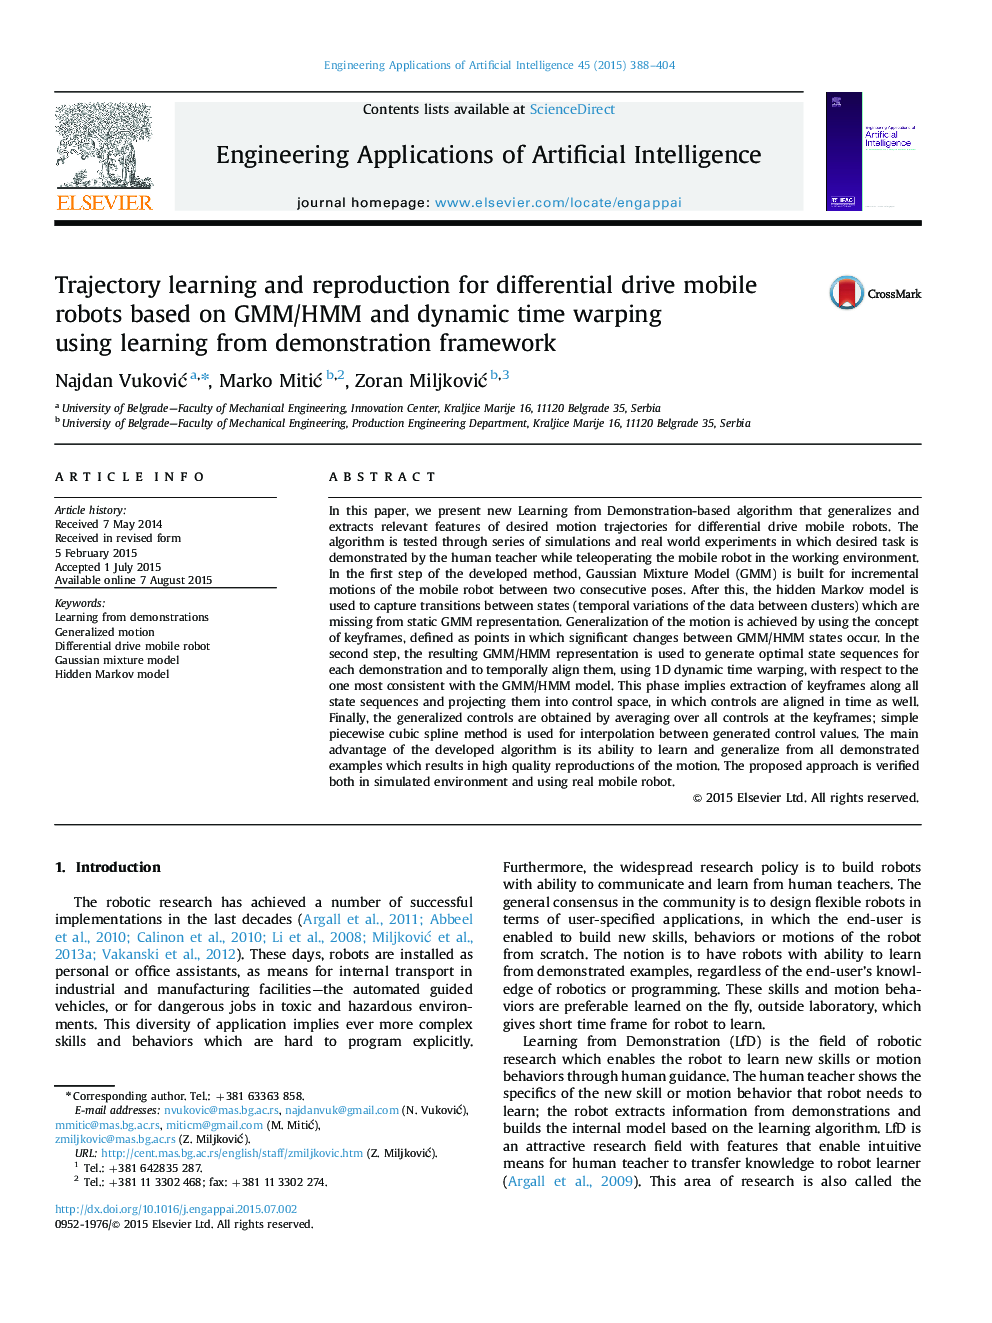 Trajectory learning and reproduction for differential drive mobile robots based on GMM/HMM and dynamic time warping using learning from demonstration framework